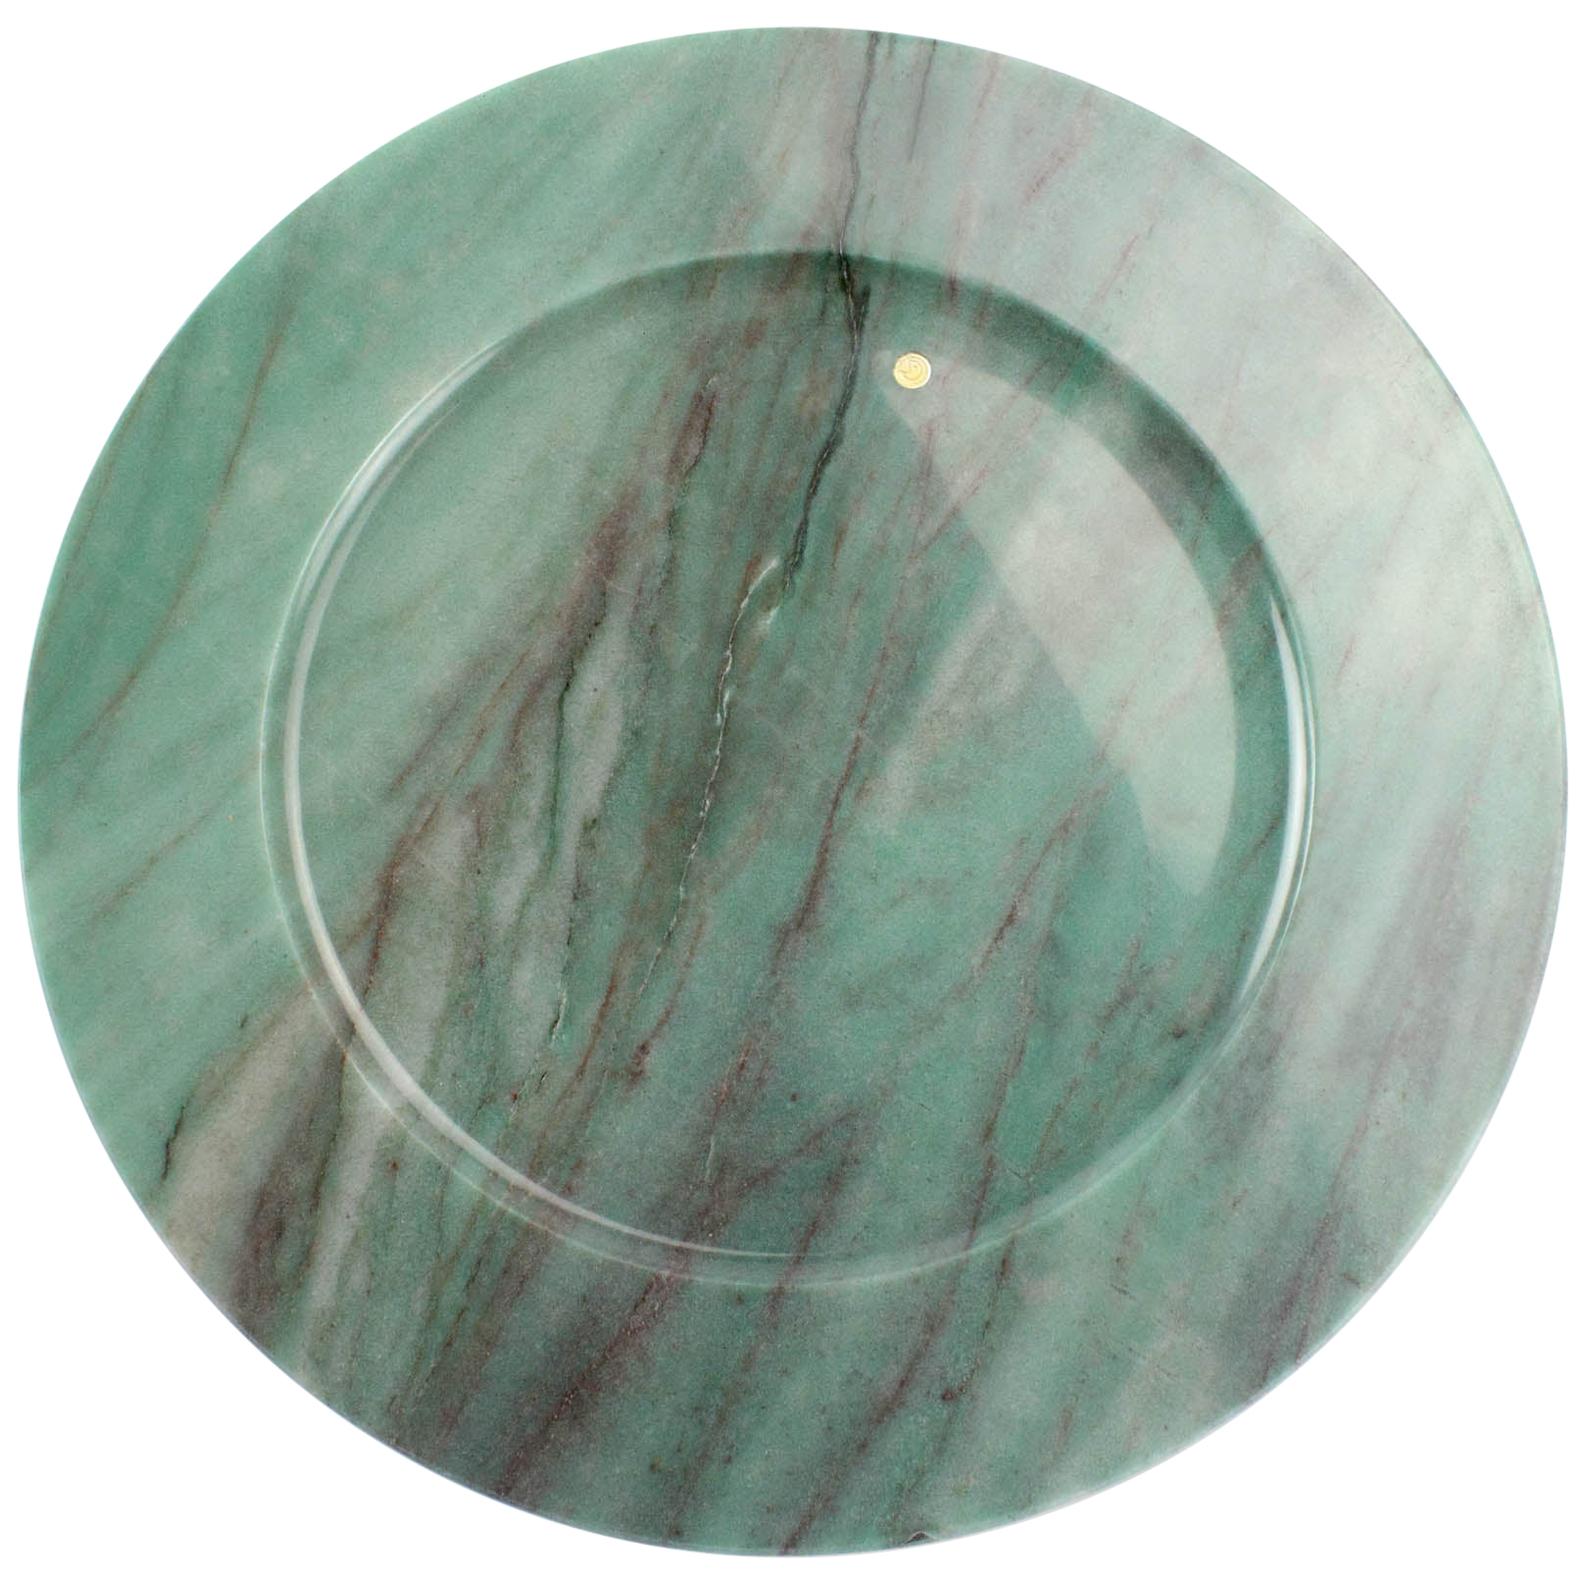 Charger Plate Platters Serveware Set of 4 Green Quartzite Marble Handmade Italy